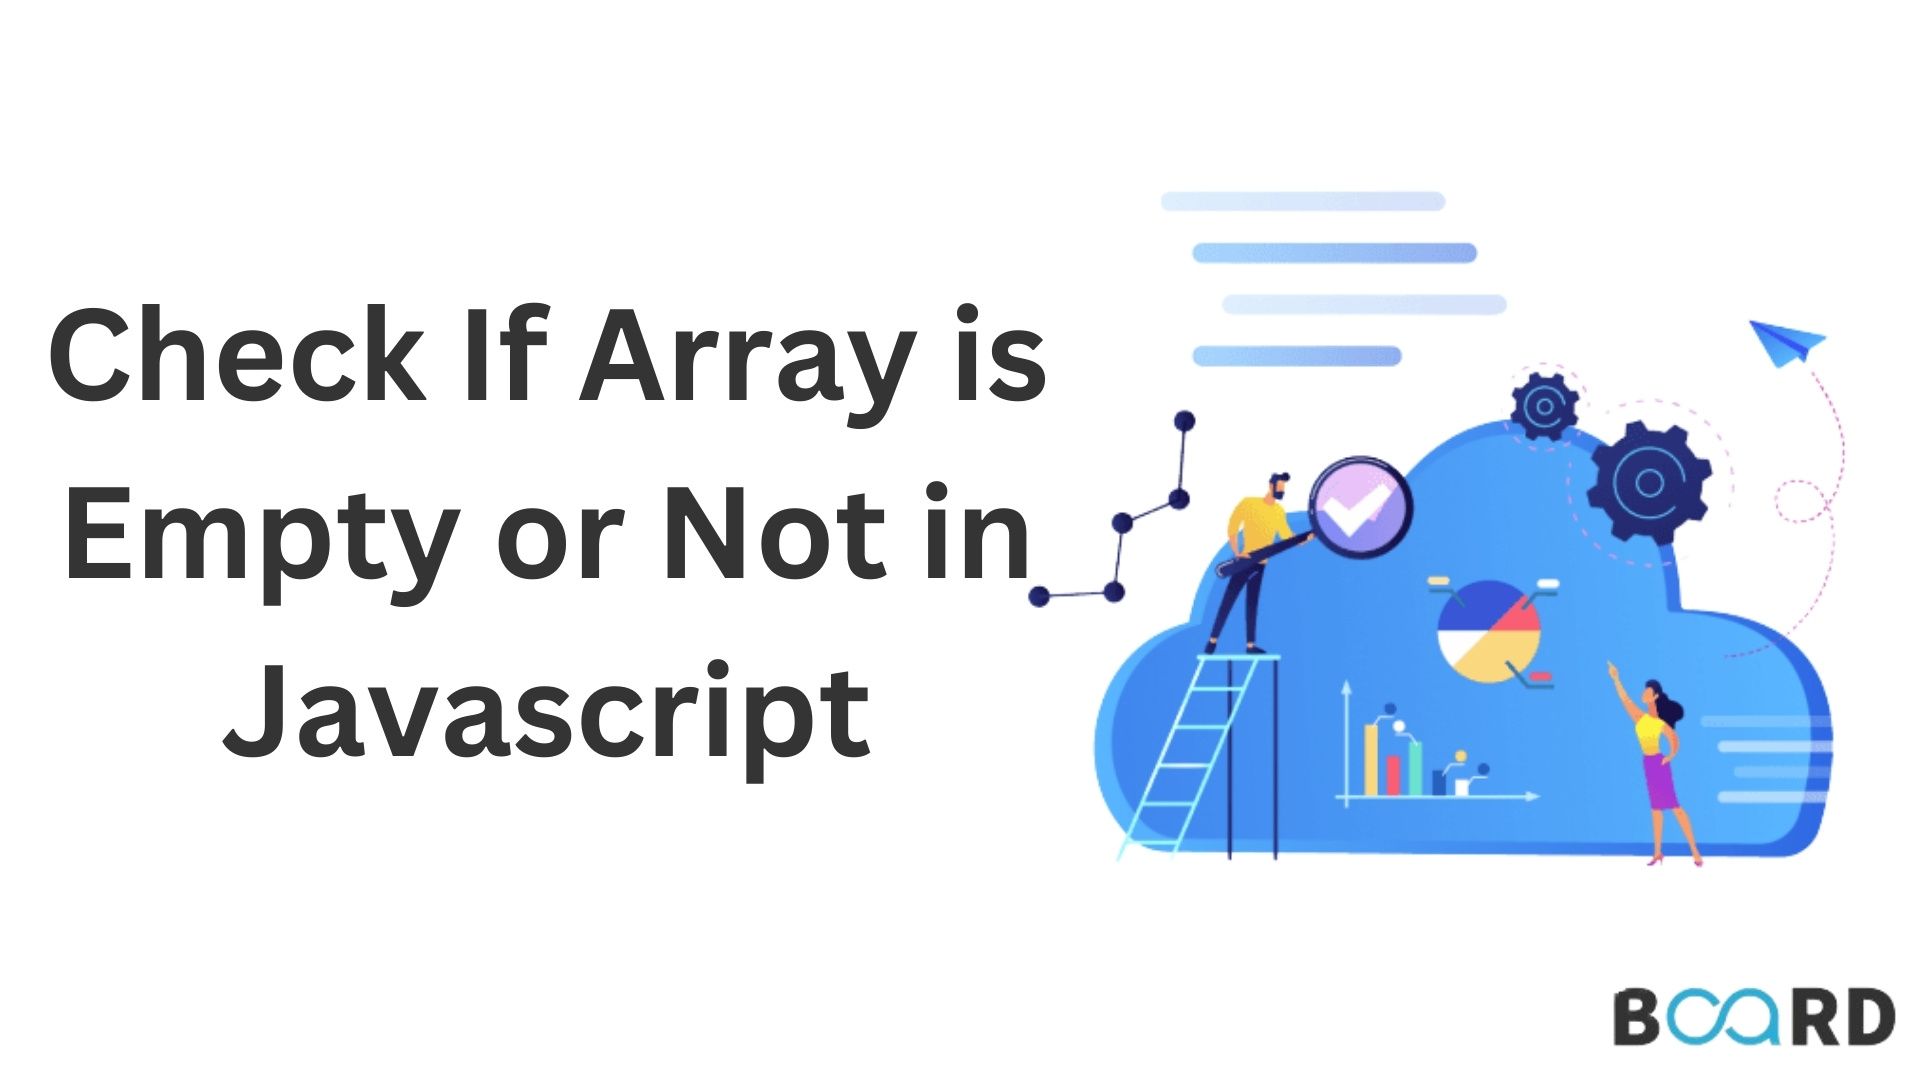 How to Quickly Check If an Array is empty or not in Javascript?